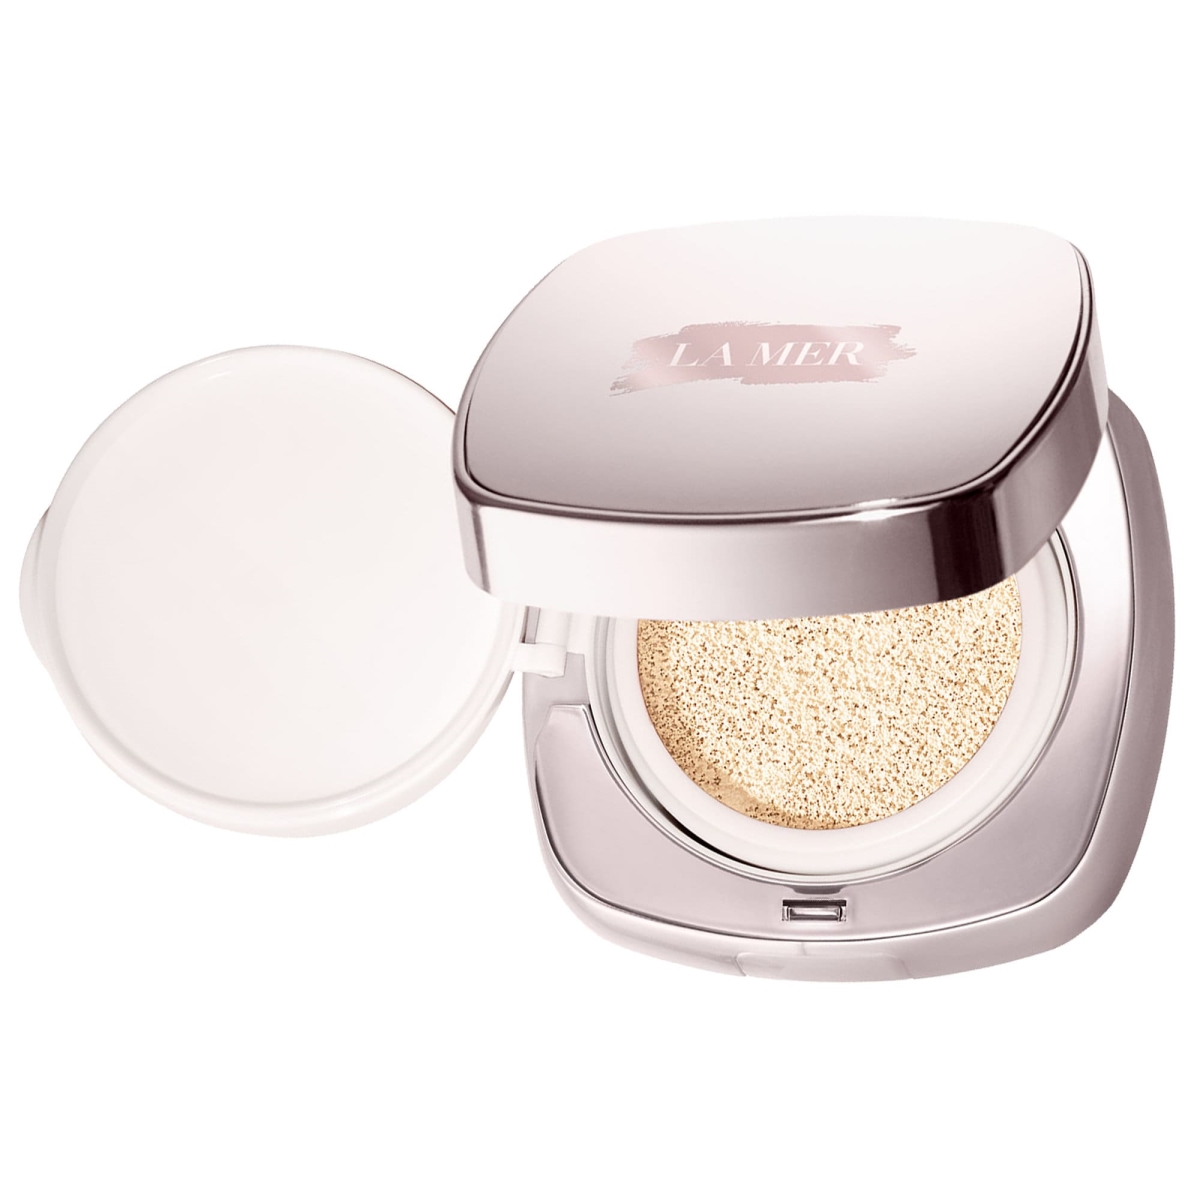 240204 0.42 Oz The Luminous Lifting Cushion Foundation Spf 20 With Extra Refill - No.03 Warm Porcelain